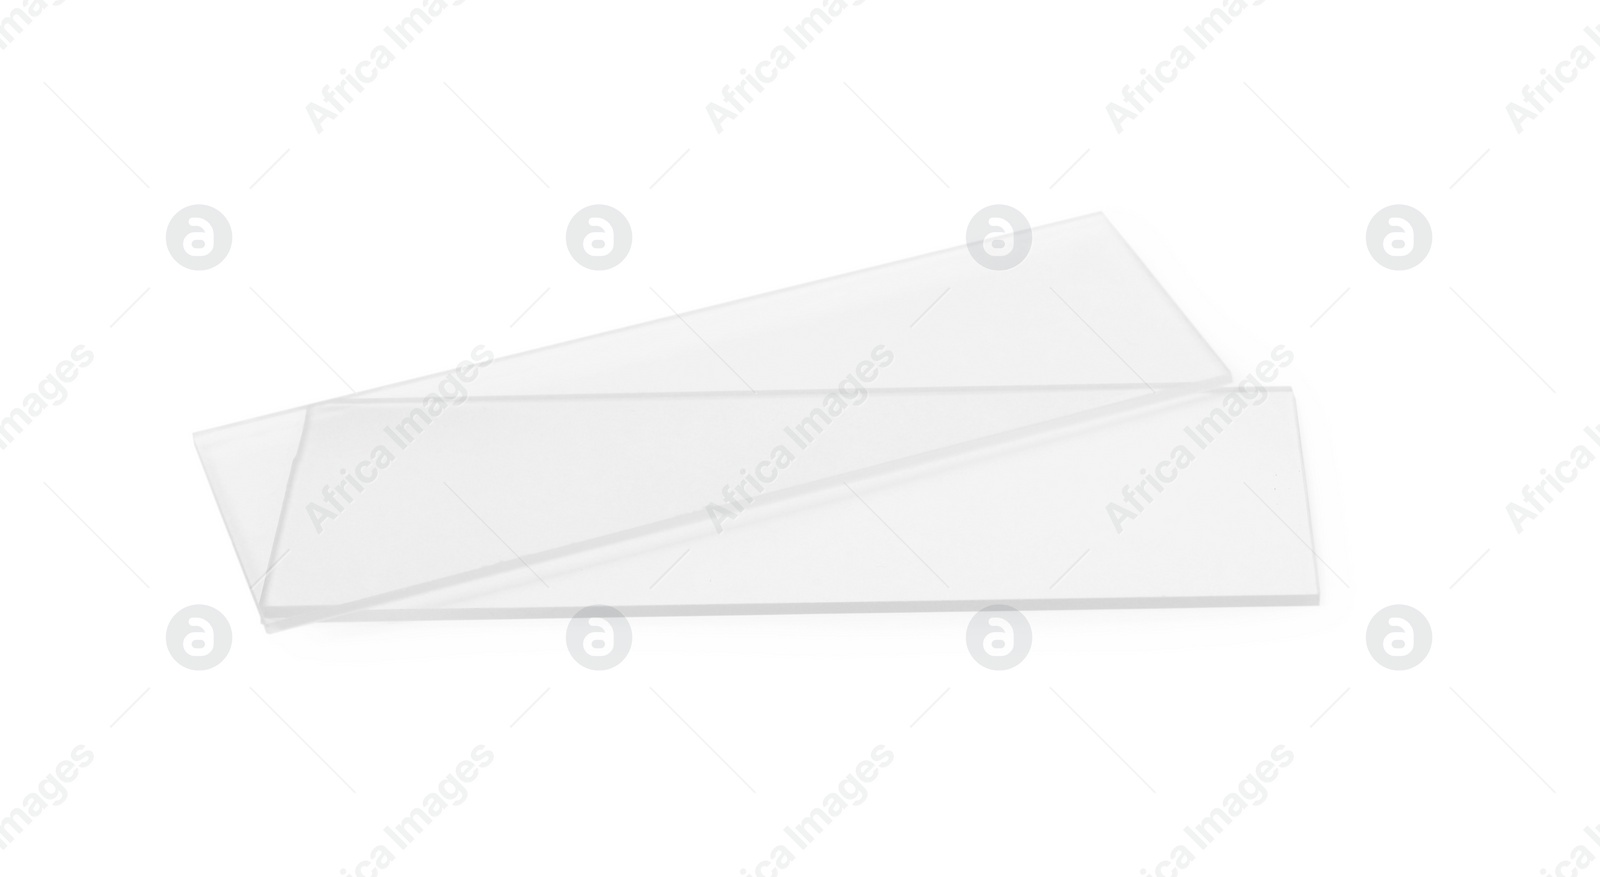 Photo of Clean glass microscope slides on white background